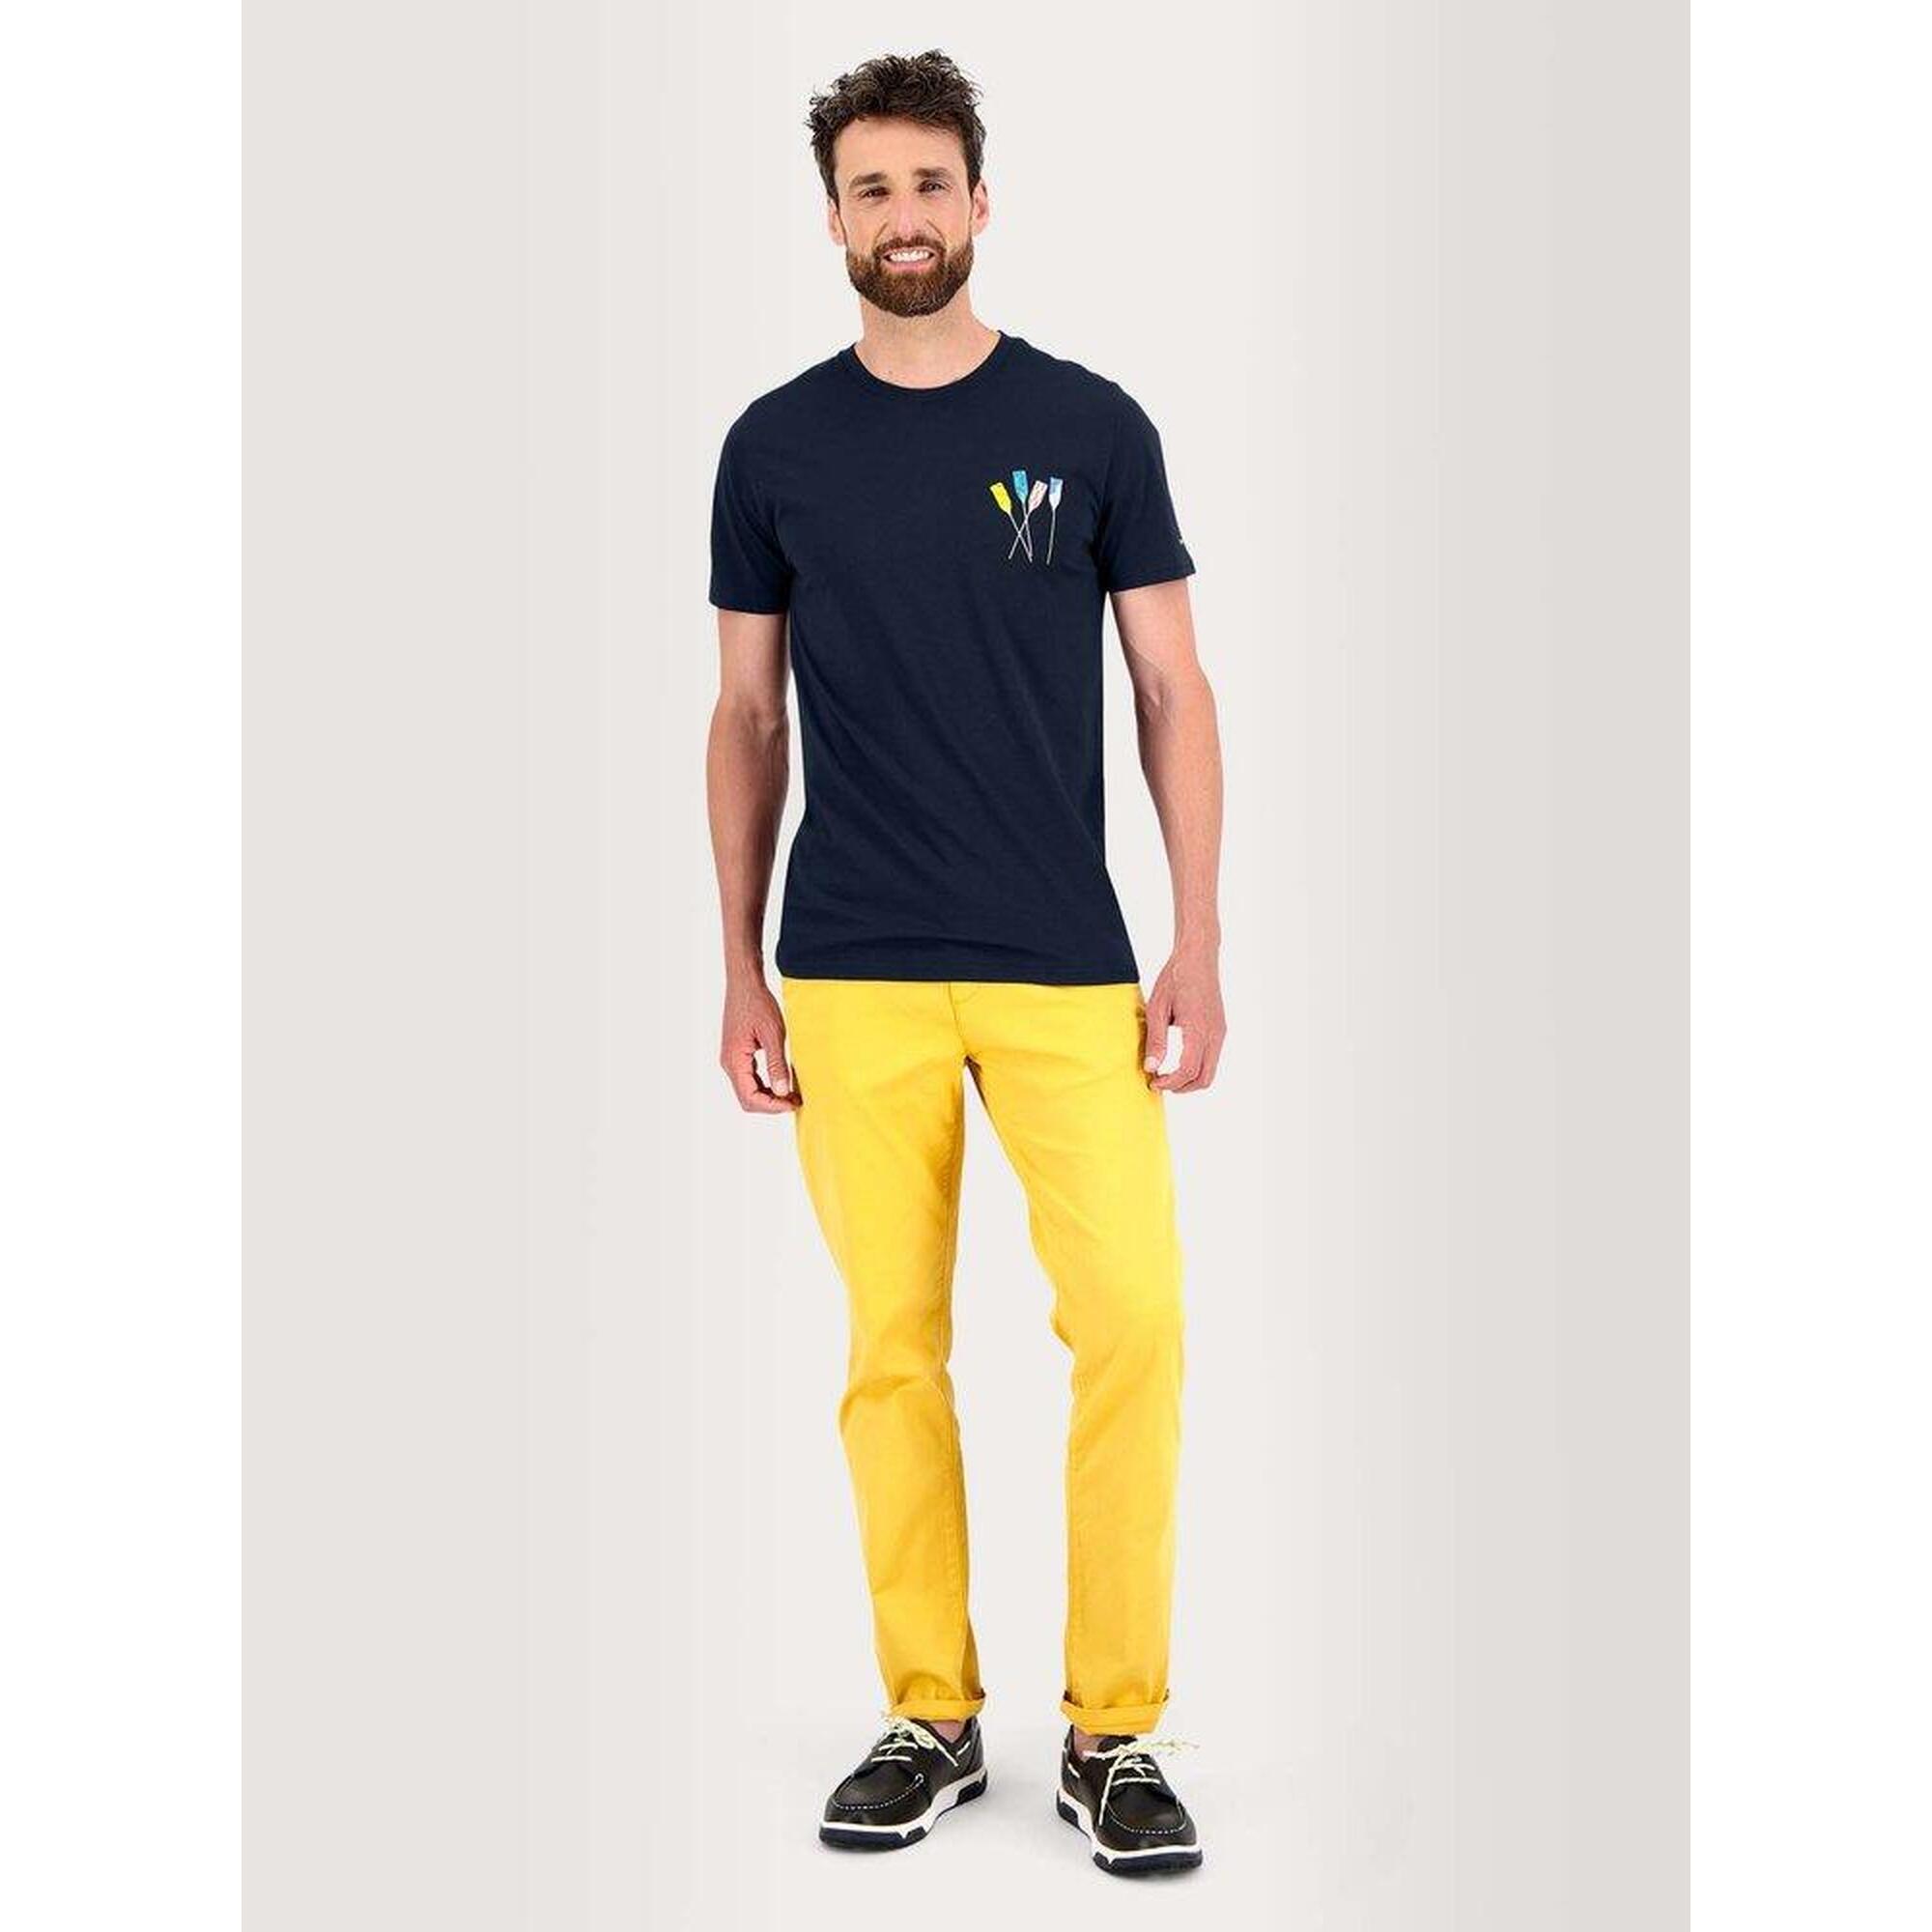 T-shirt manches courtes Homme - SKIFFTEE Navy